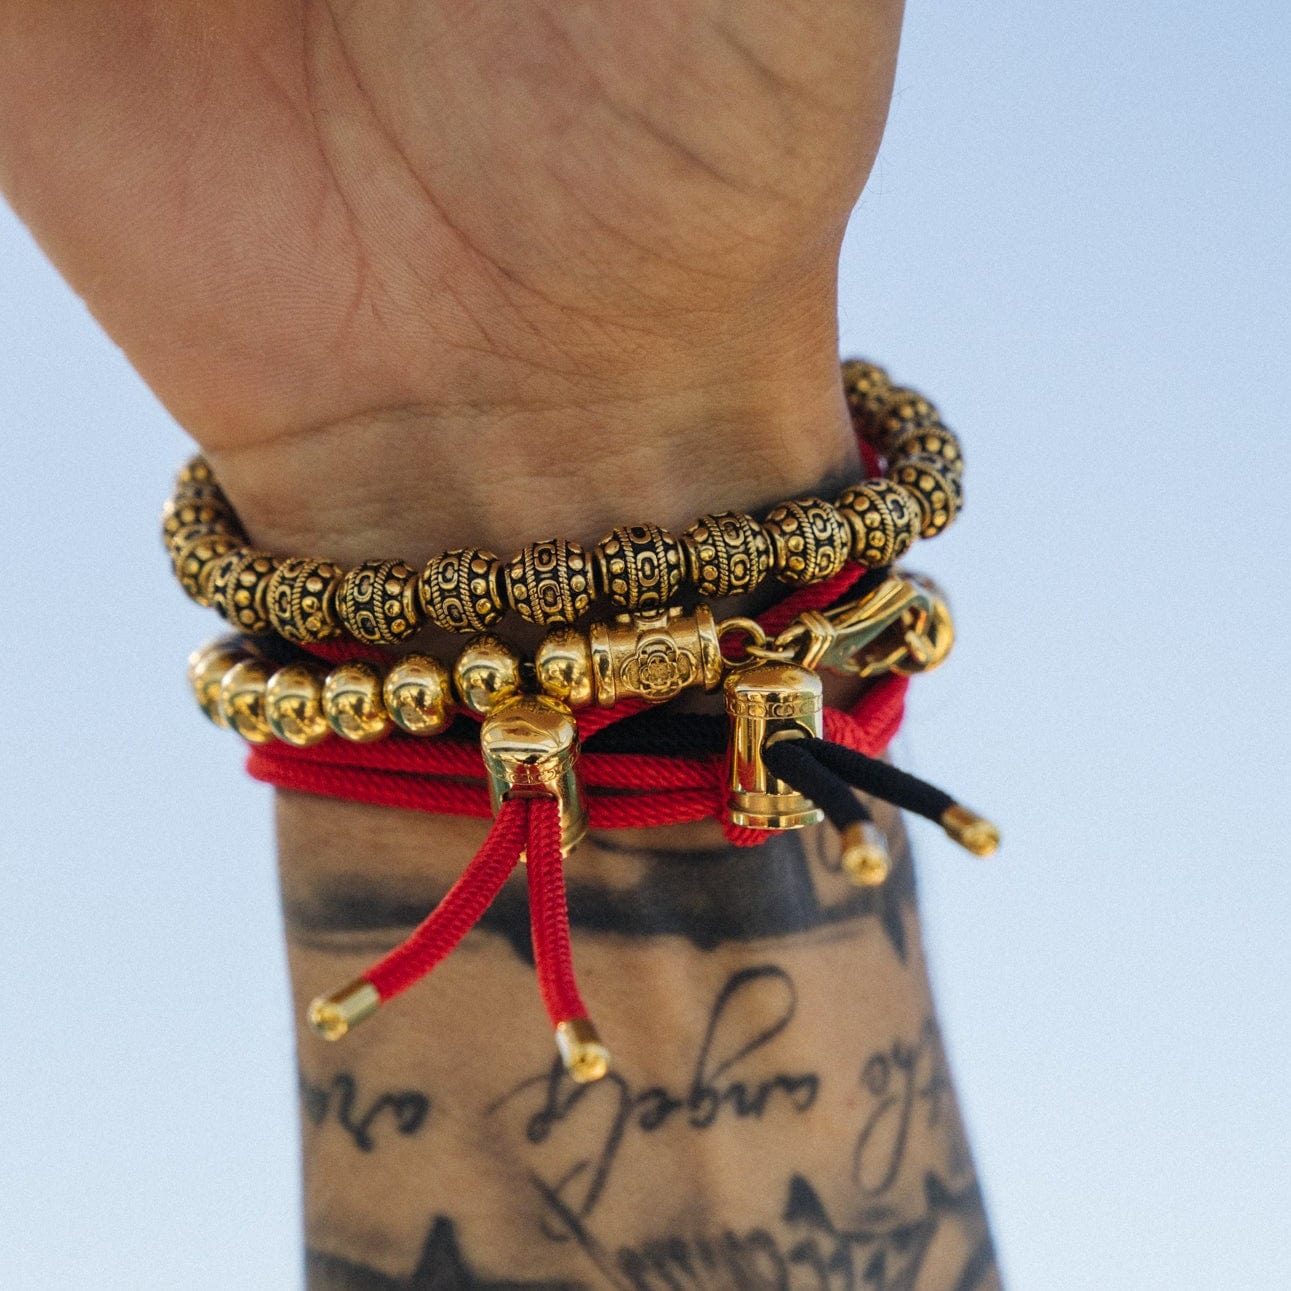 Red Cord Toggle Bracelet (Gold)